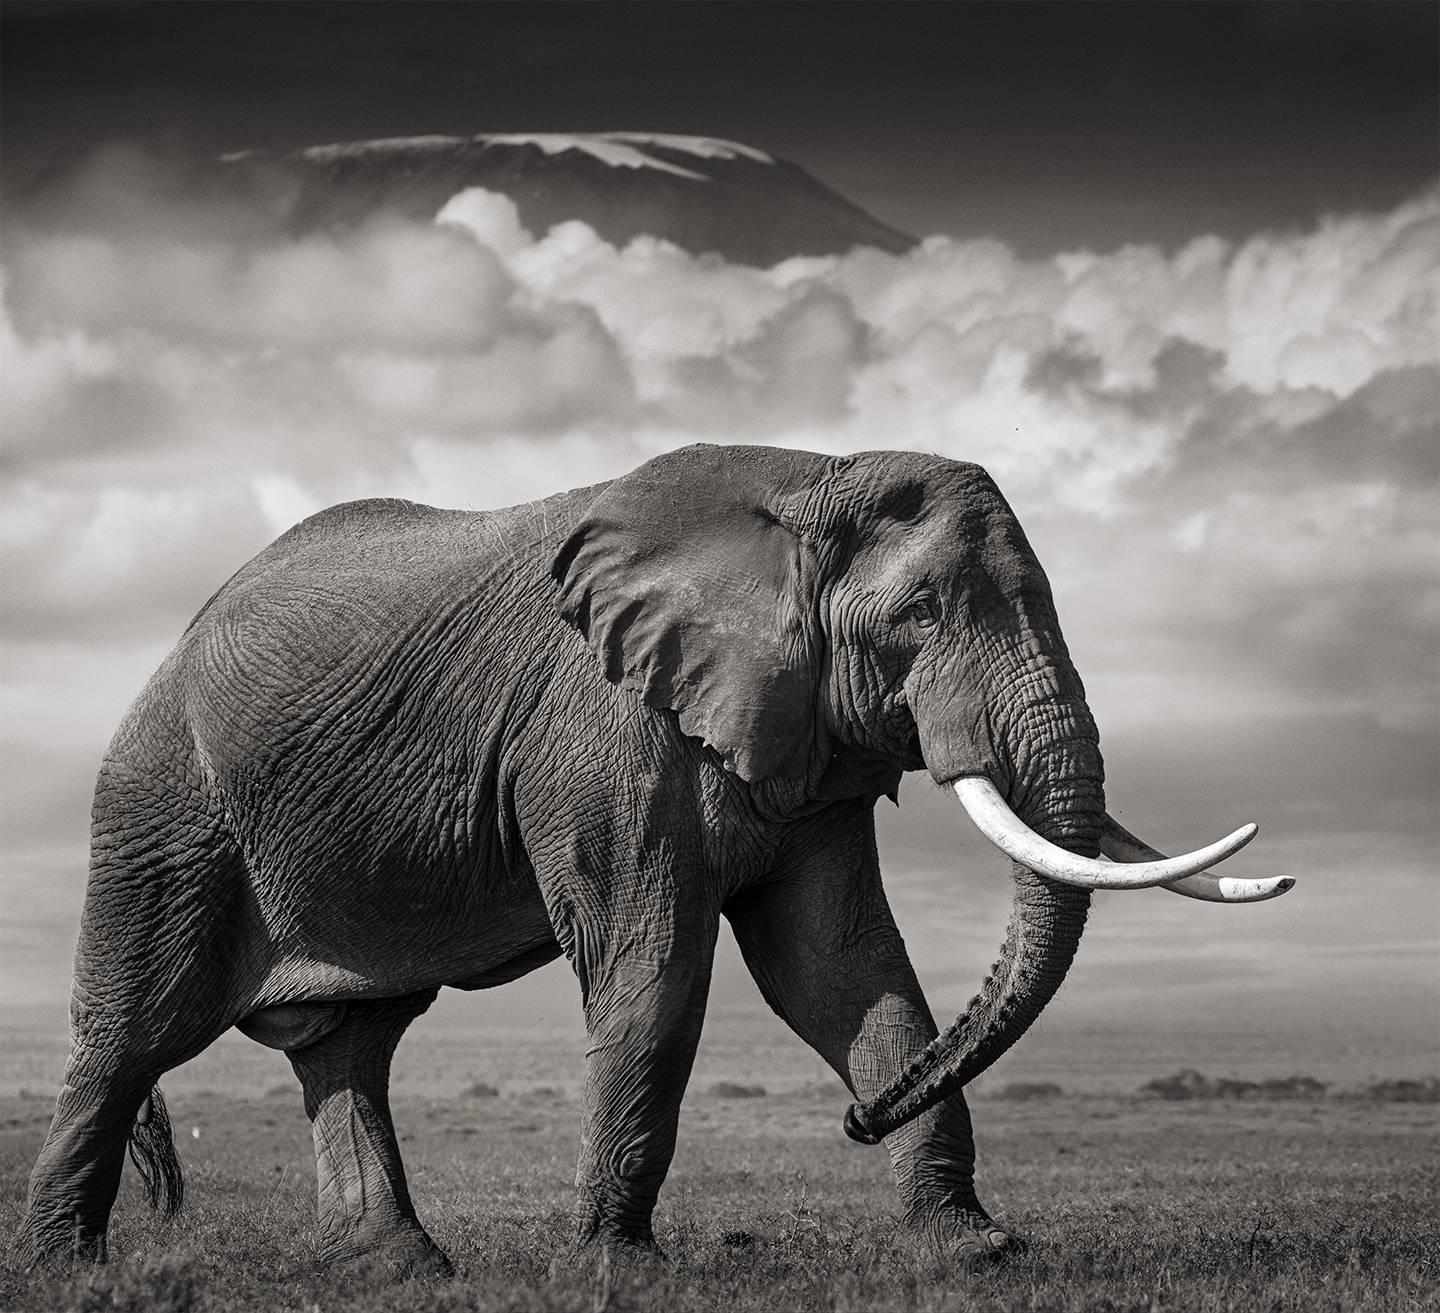 Joachim Schmeisser Black and White Photograph - Elephant in front of Killimanjaro